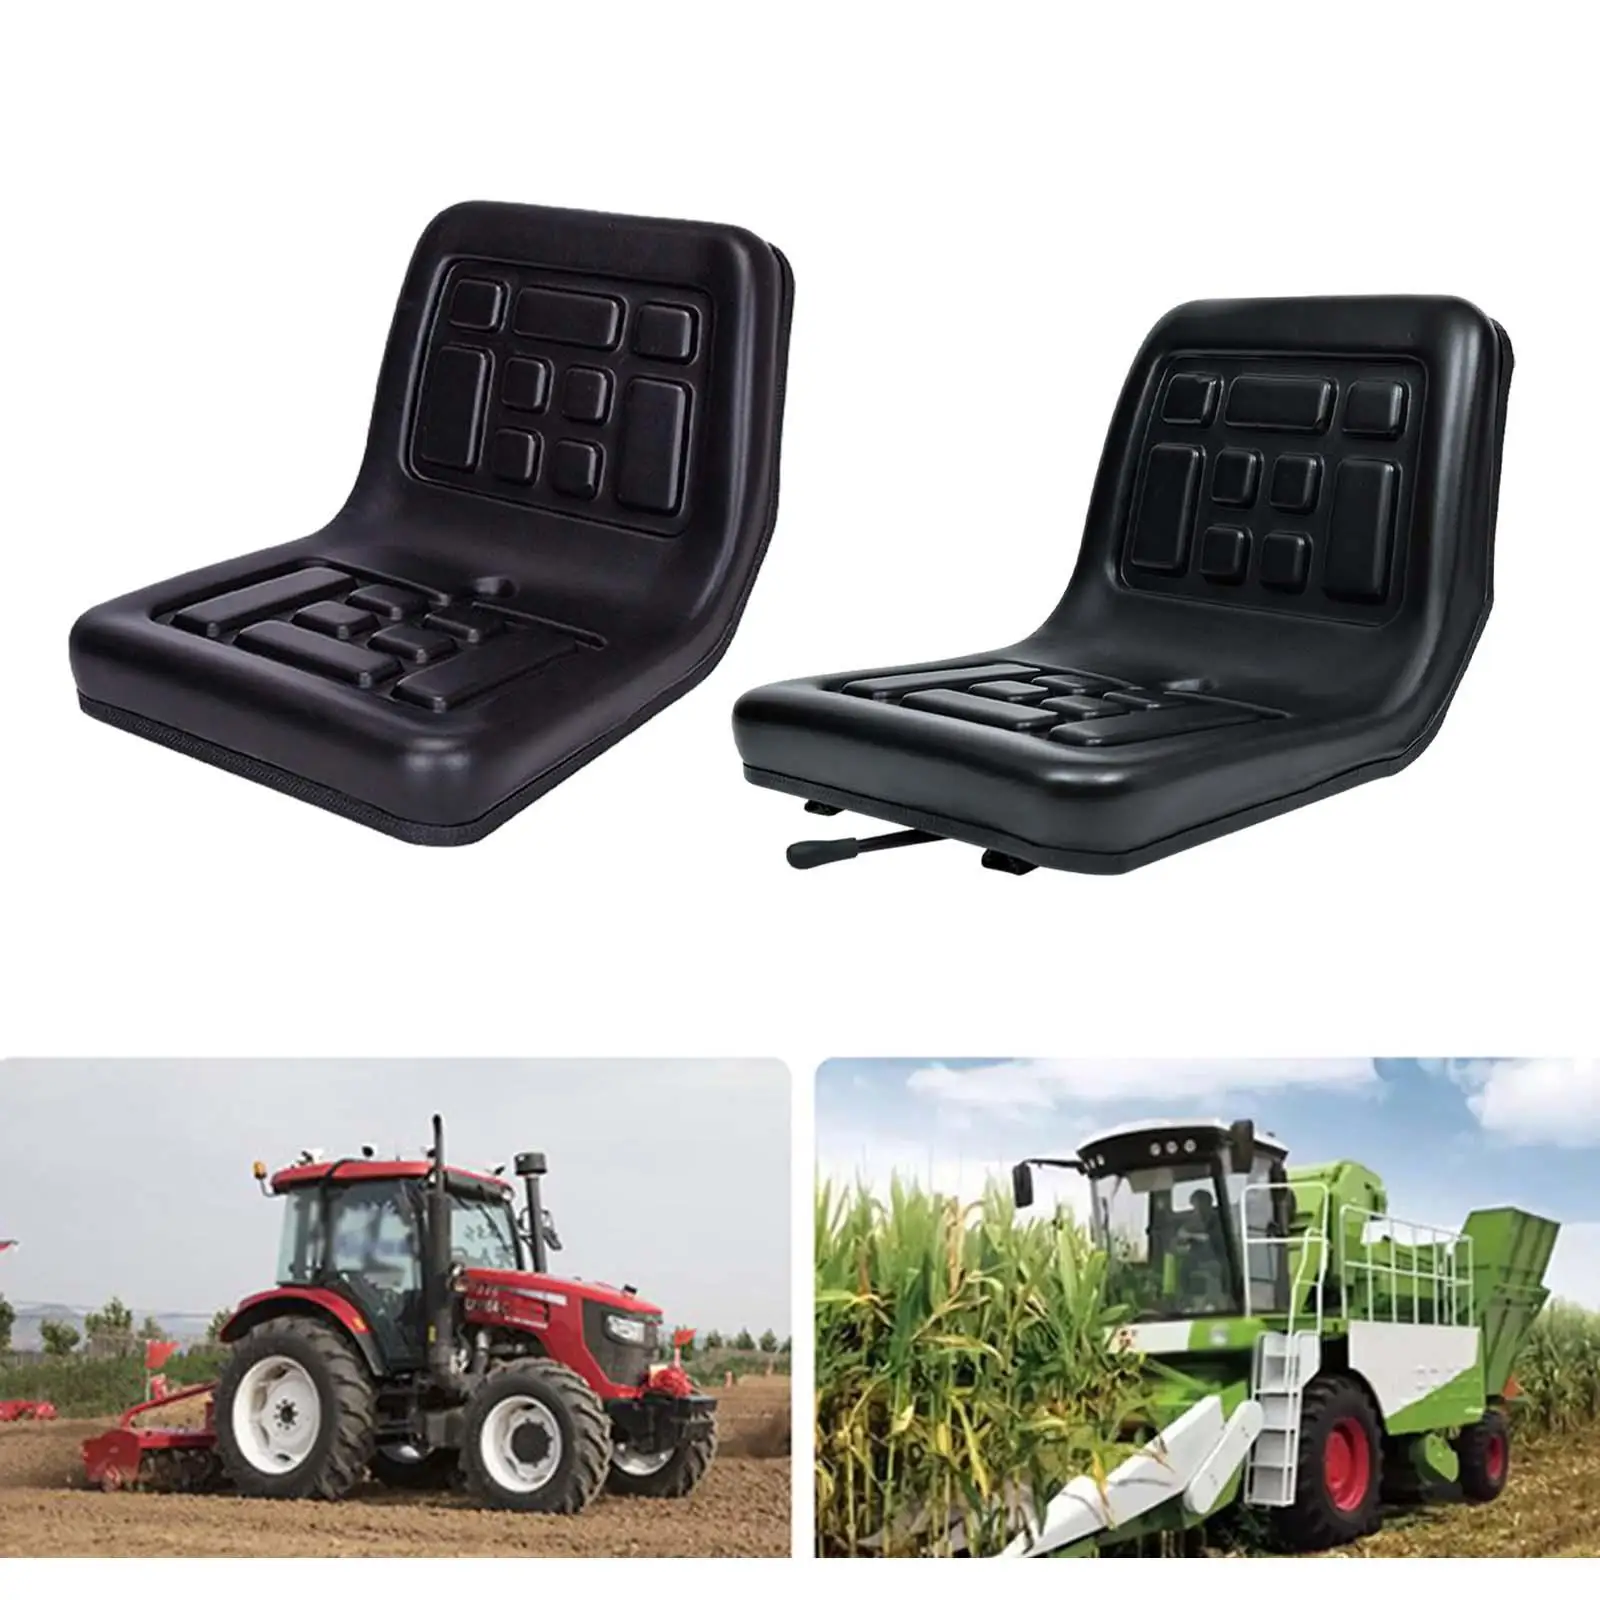 Tractor Seat Harvester Seat Lawn Mower Seat Universal for Forklift Tractor